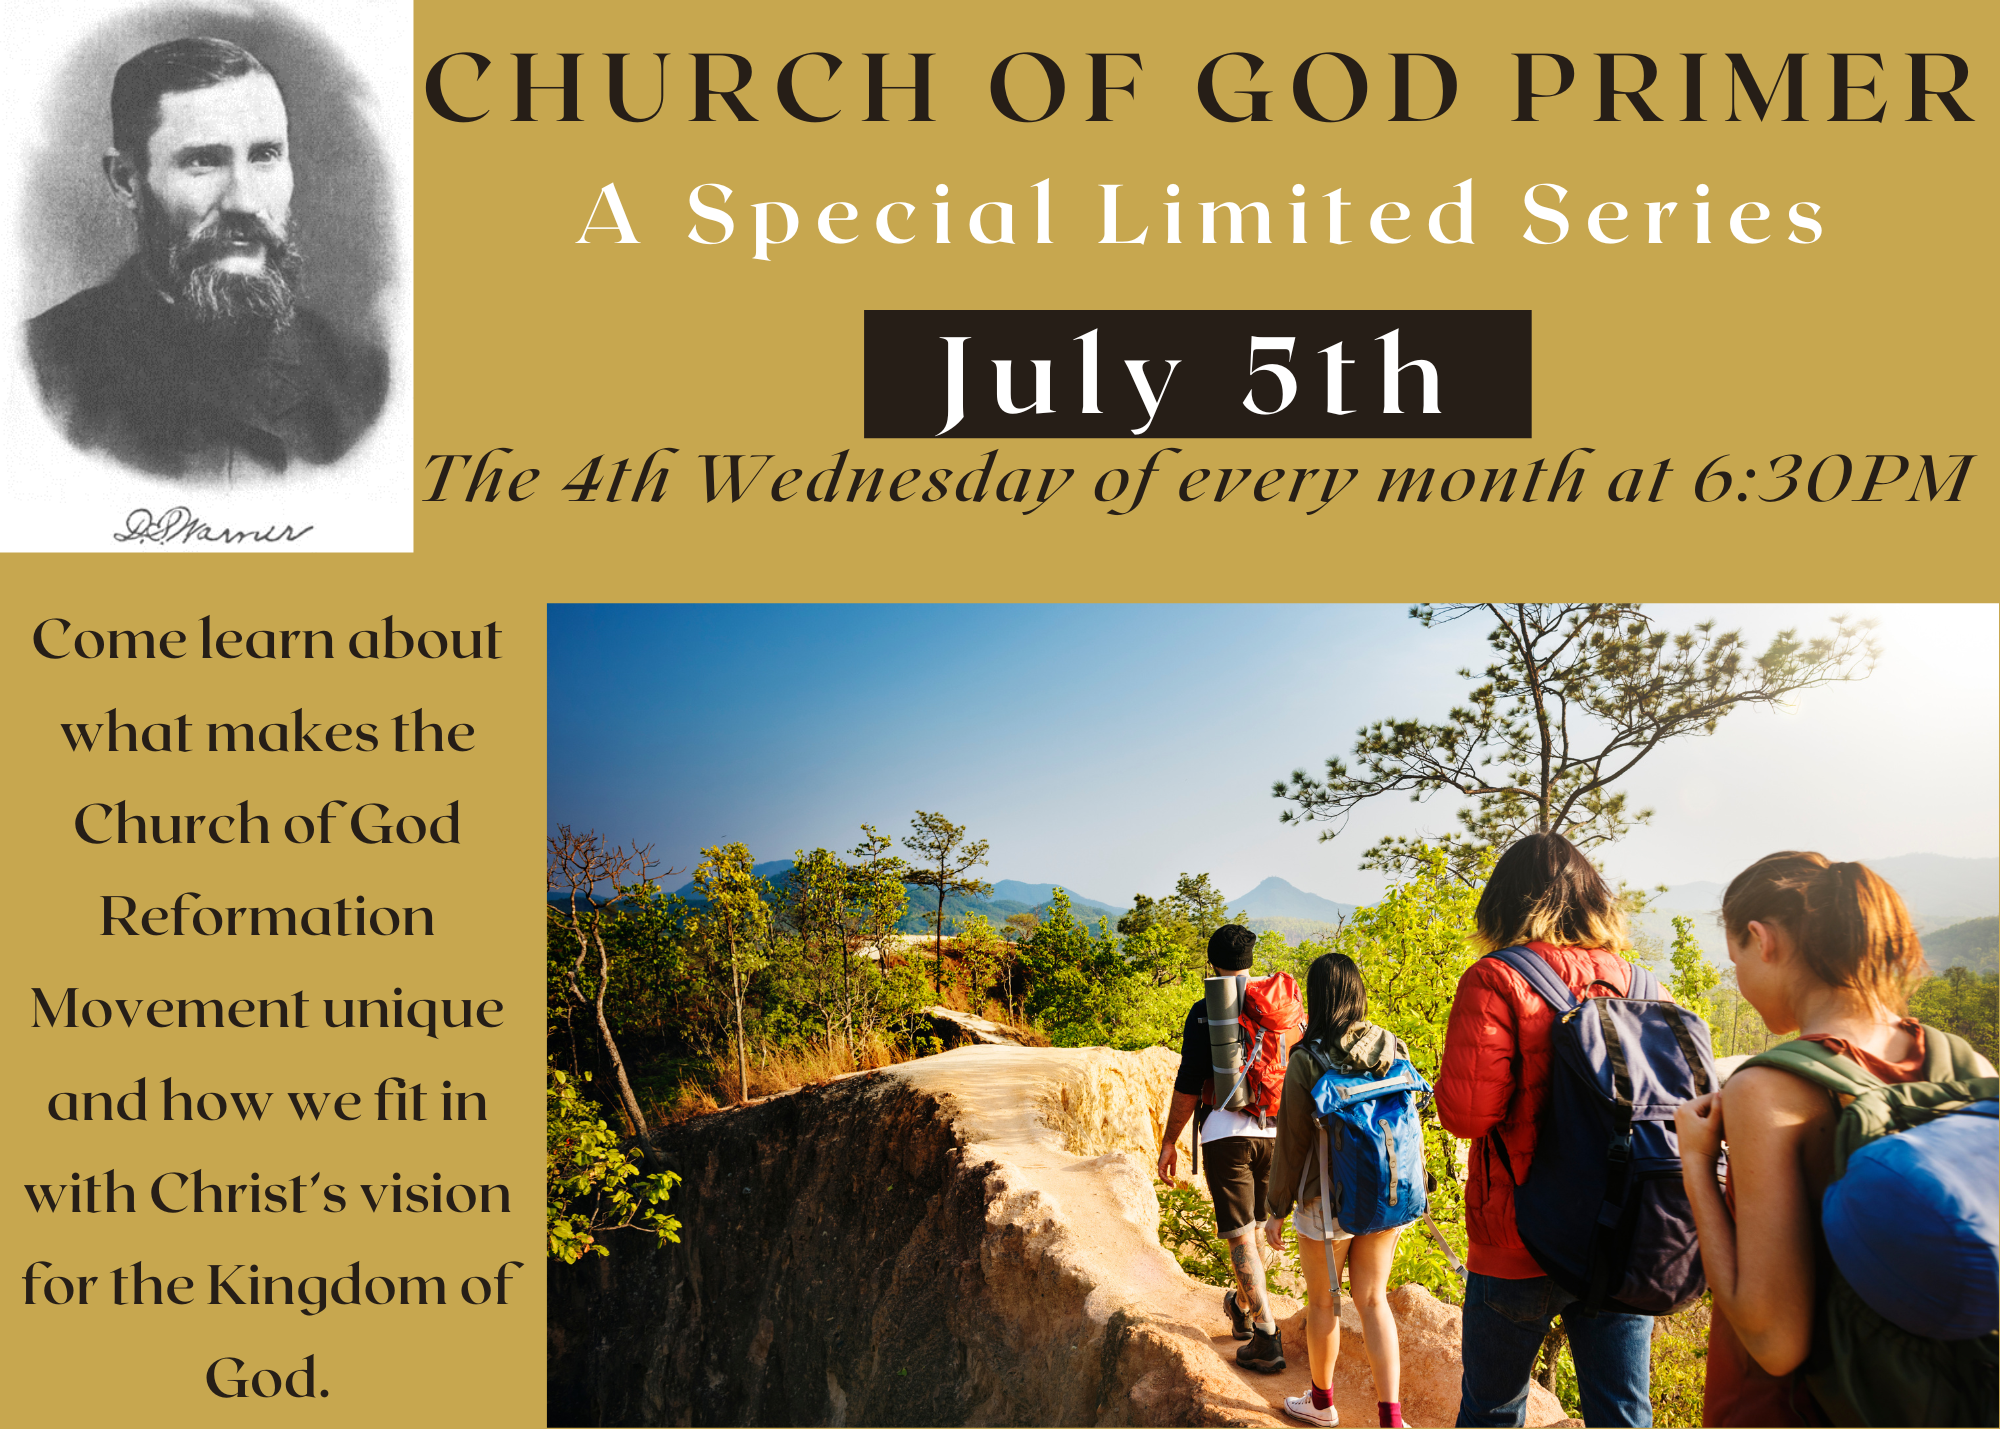 CHURCH OF GOD PRIMER A Special Limited Series The 4th Wednesday of every month. First session Feb 22nd at 630PM Come learn about what makes the Church of God Reformation Movement unique and how we fit in with Ch (3).png